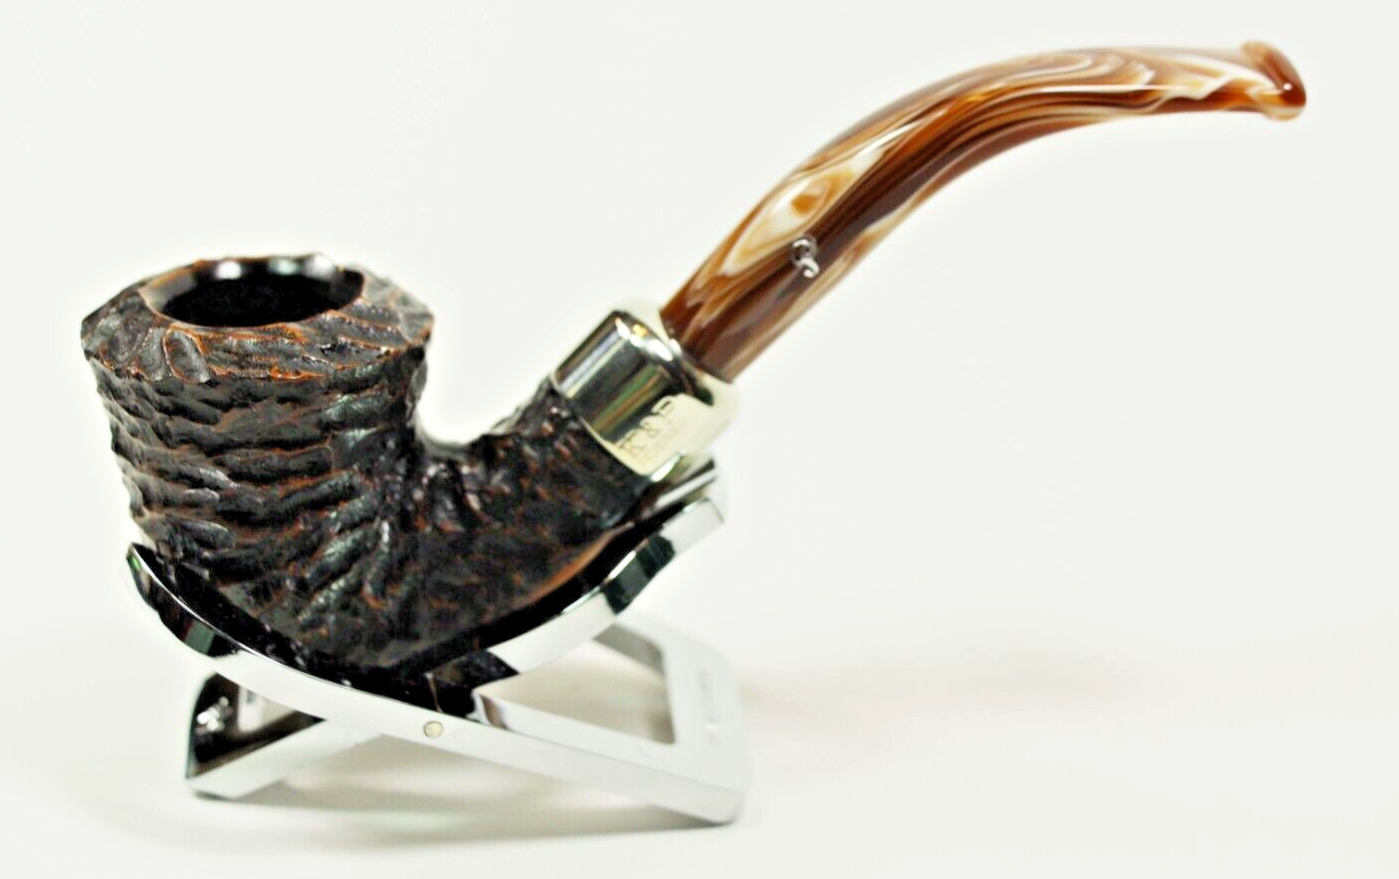 Peterson Derry B10 Rusticated Calabash Pipe, Cumberland Stem - Military Mount